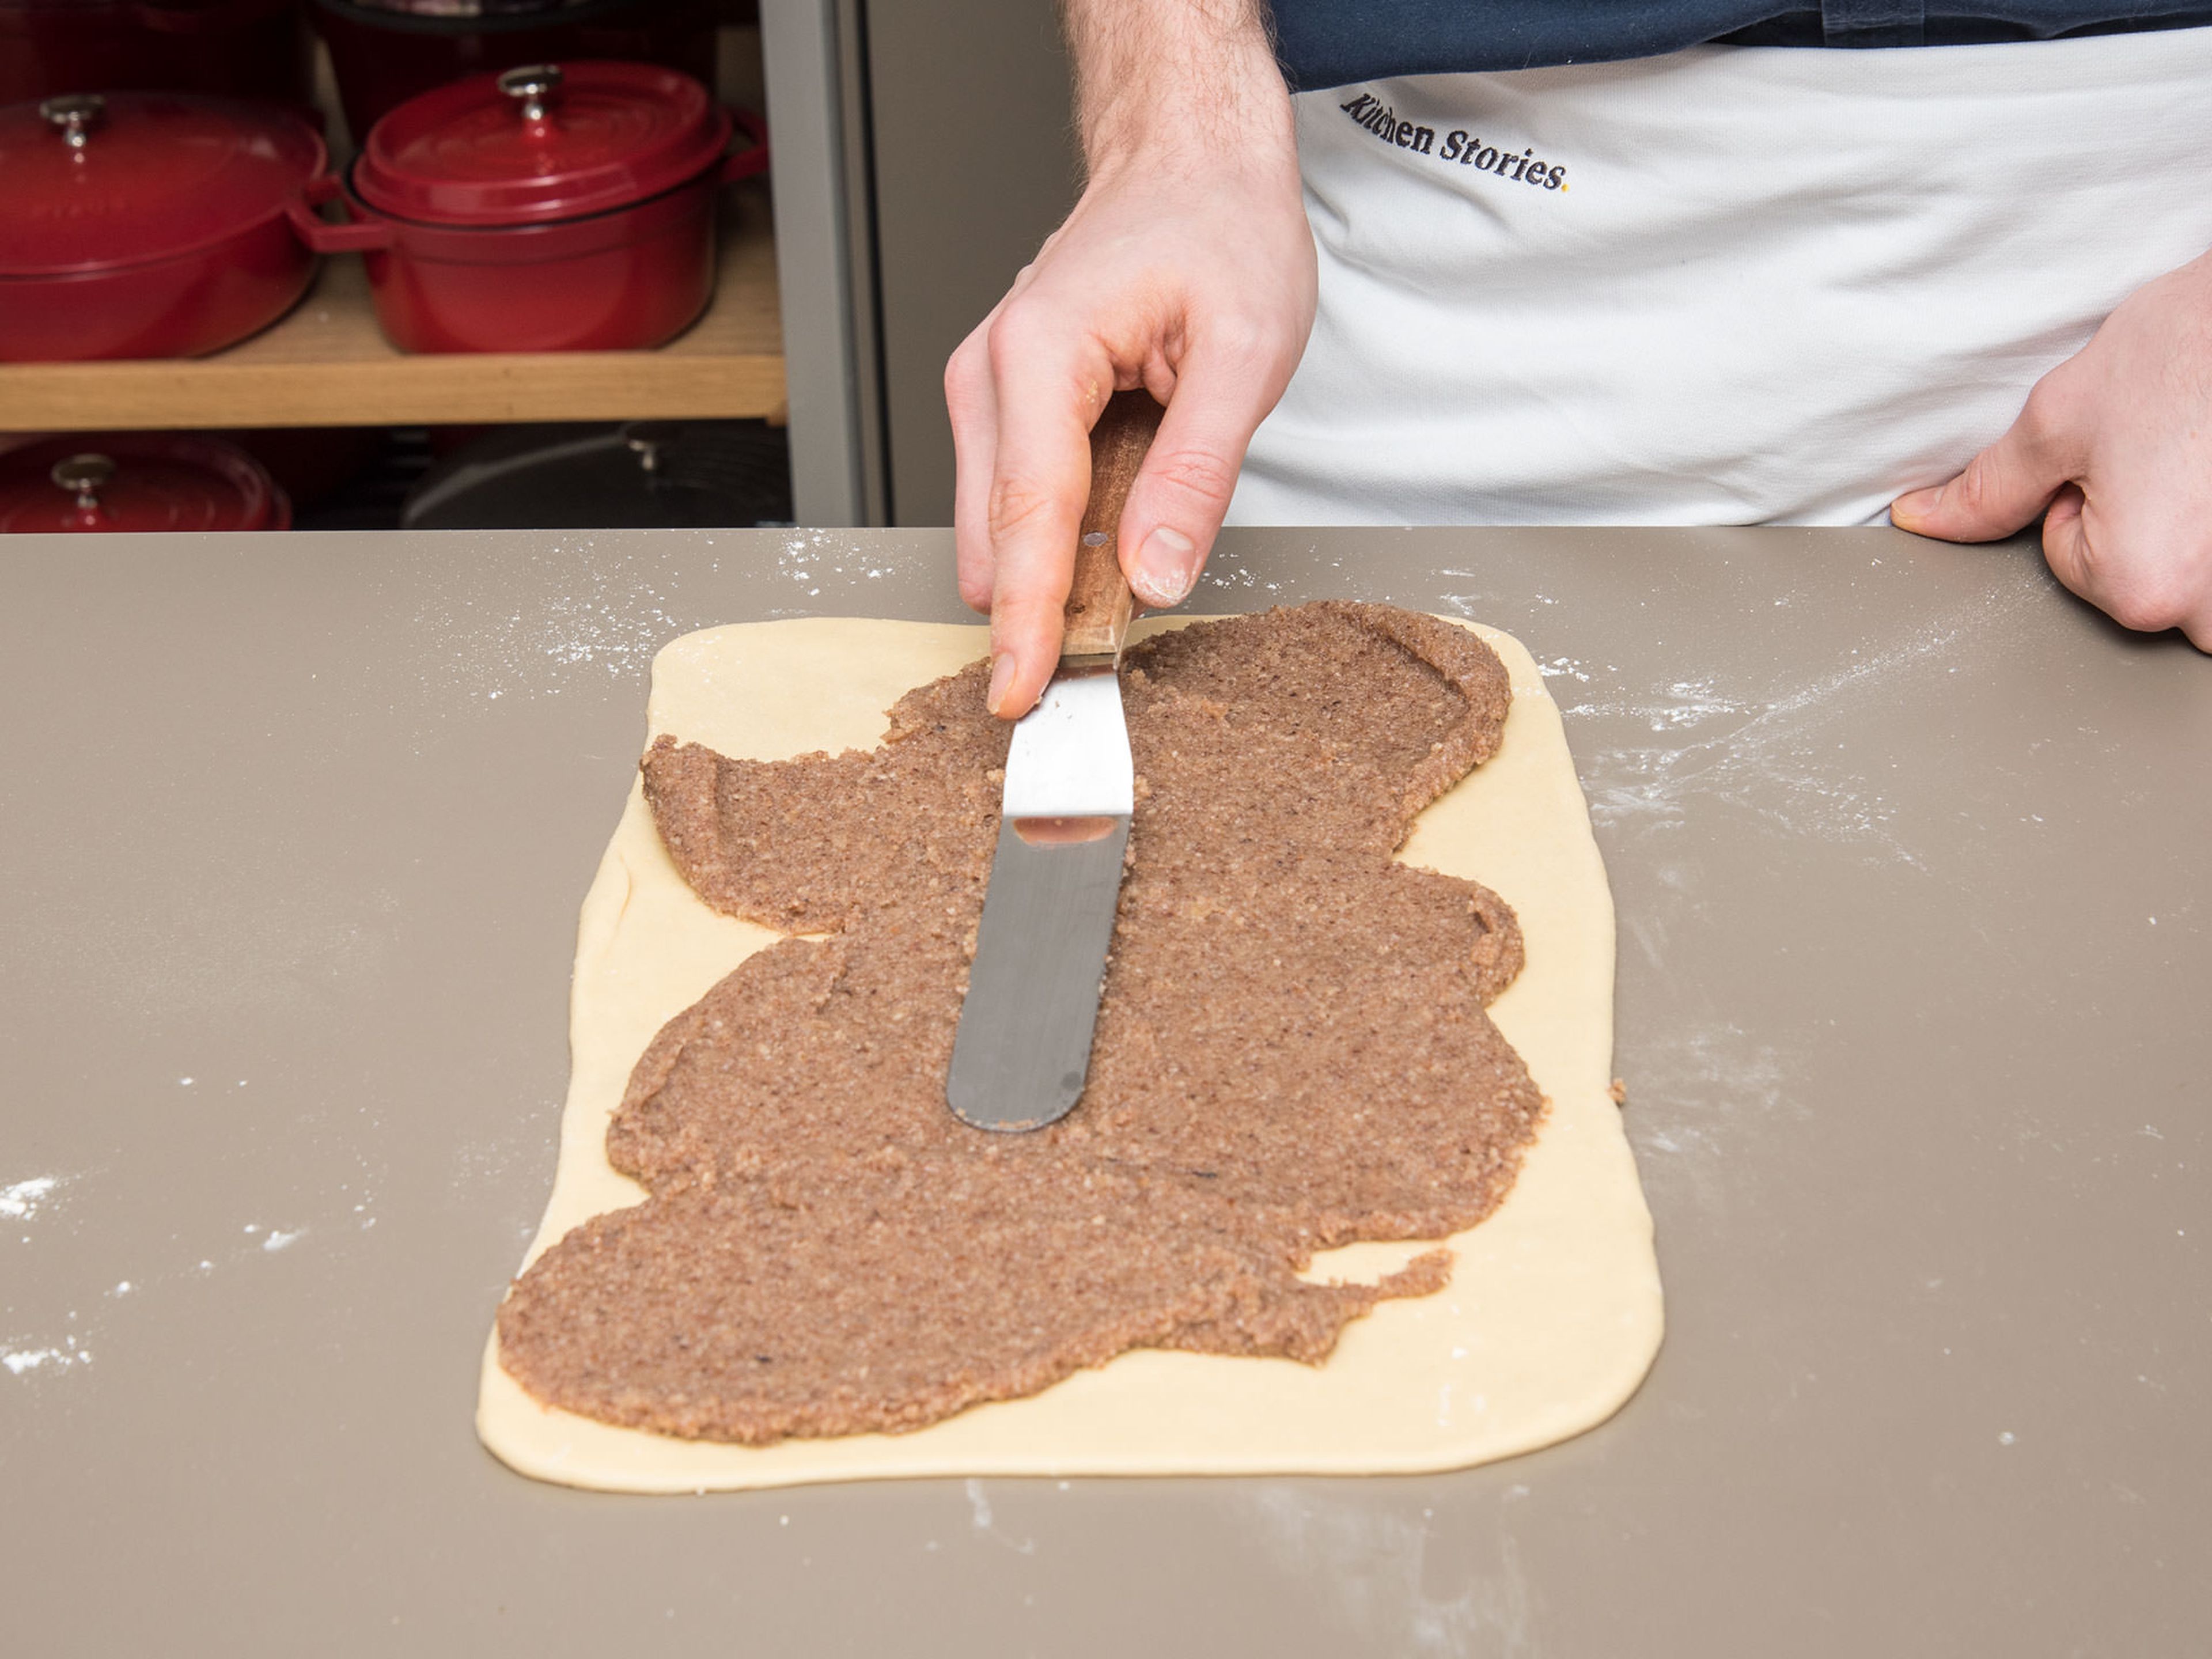 Pre-heat oven to 160°C/320°F. Dust the work surface with some flour. Roll out the dough into a 40 x 50cm/16 x 20 in. rectangle. With a palette knife, spread the nut filling onto the dough.